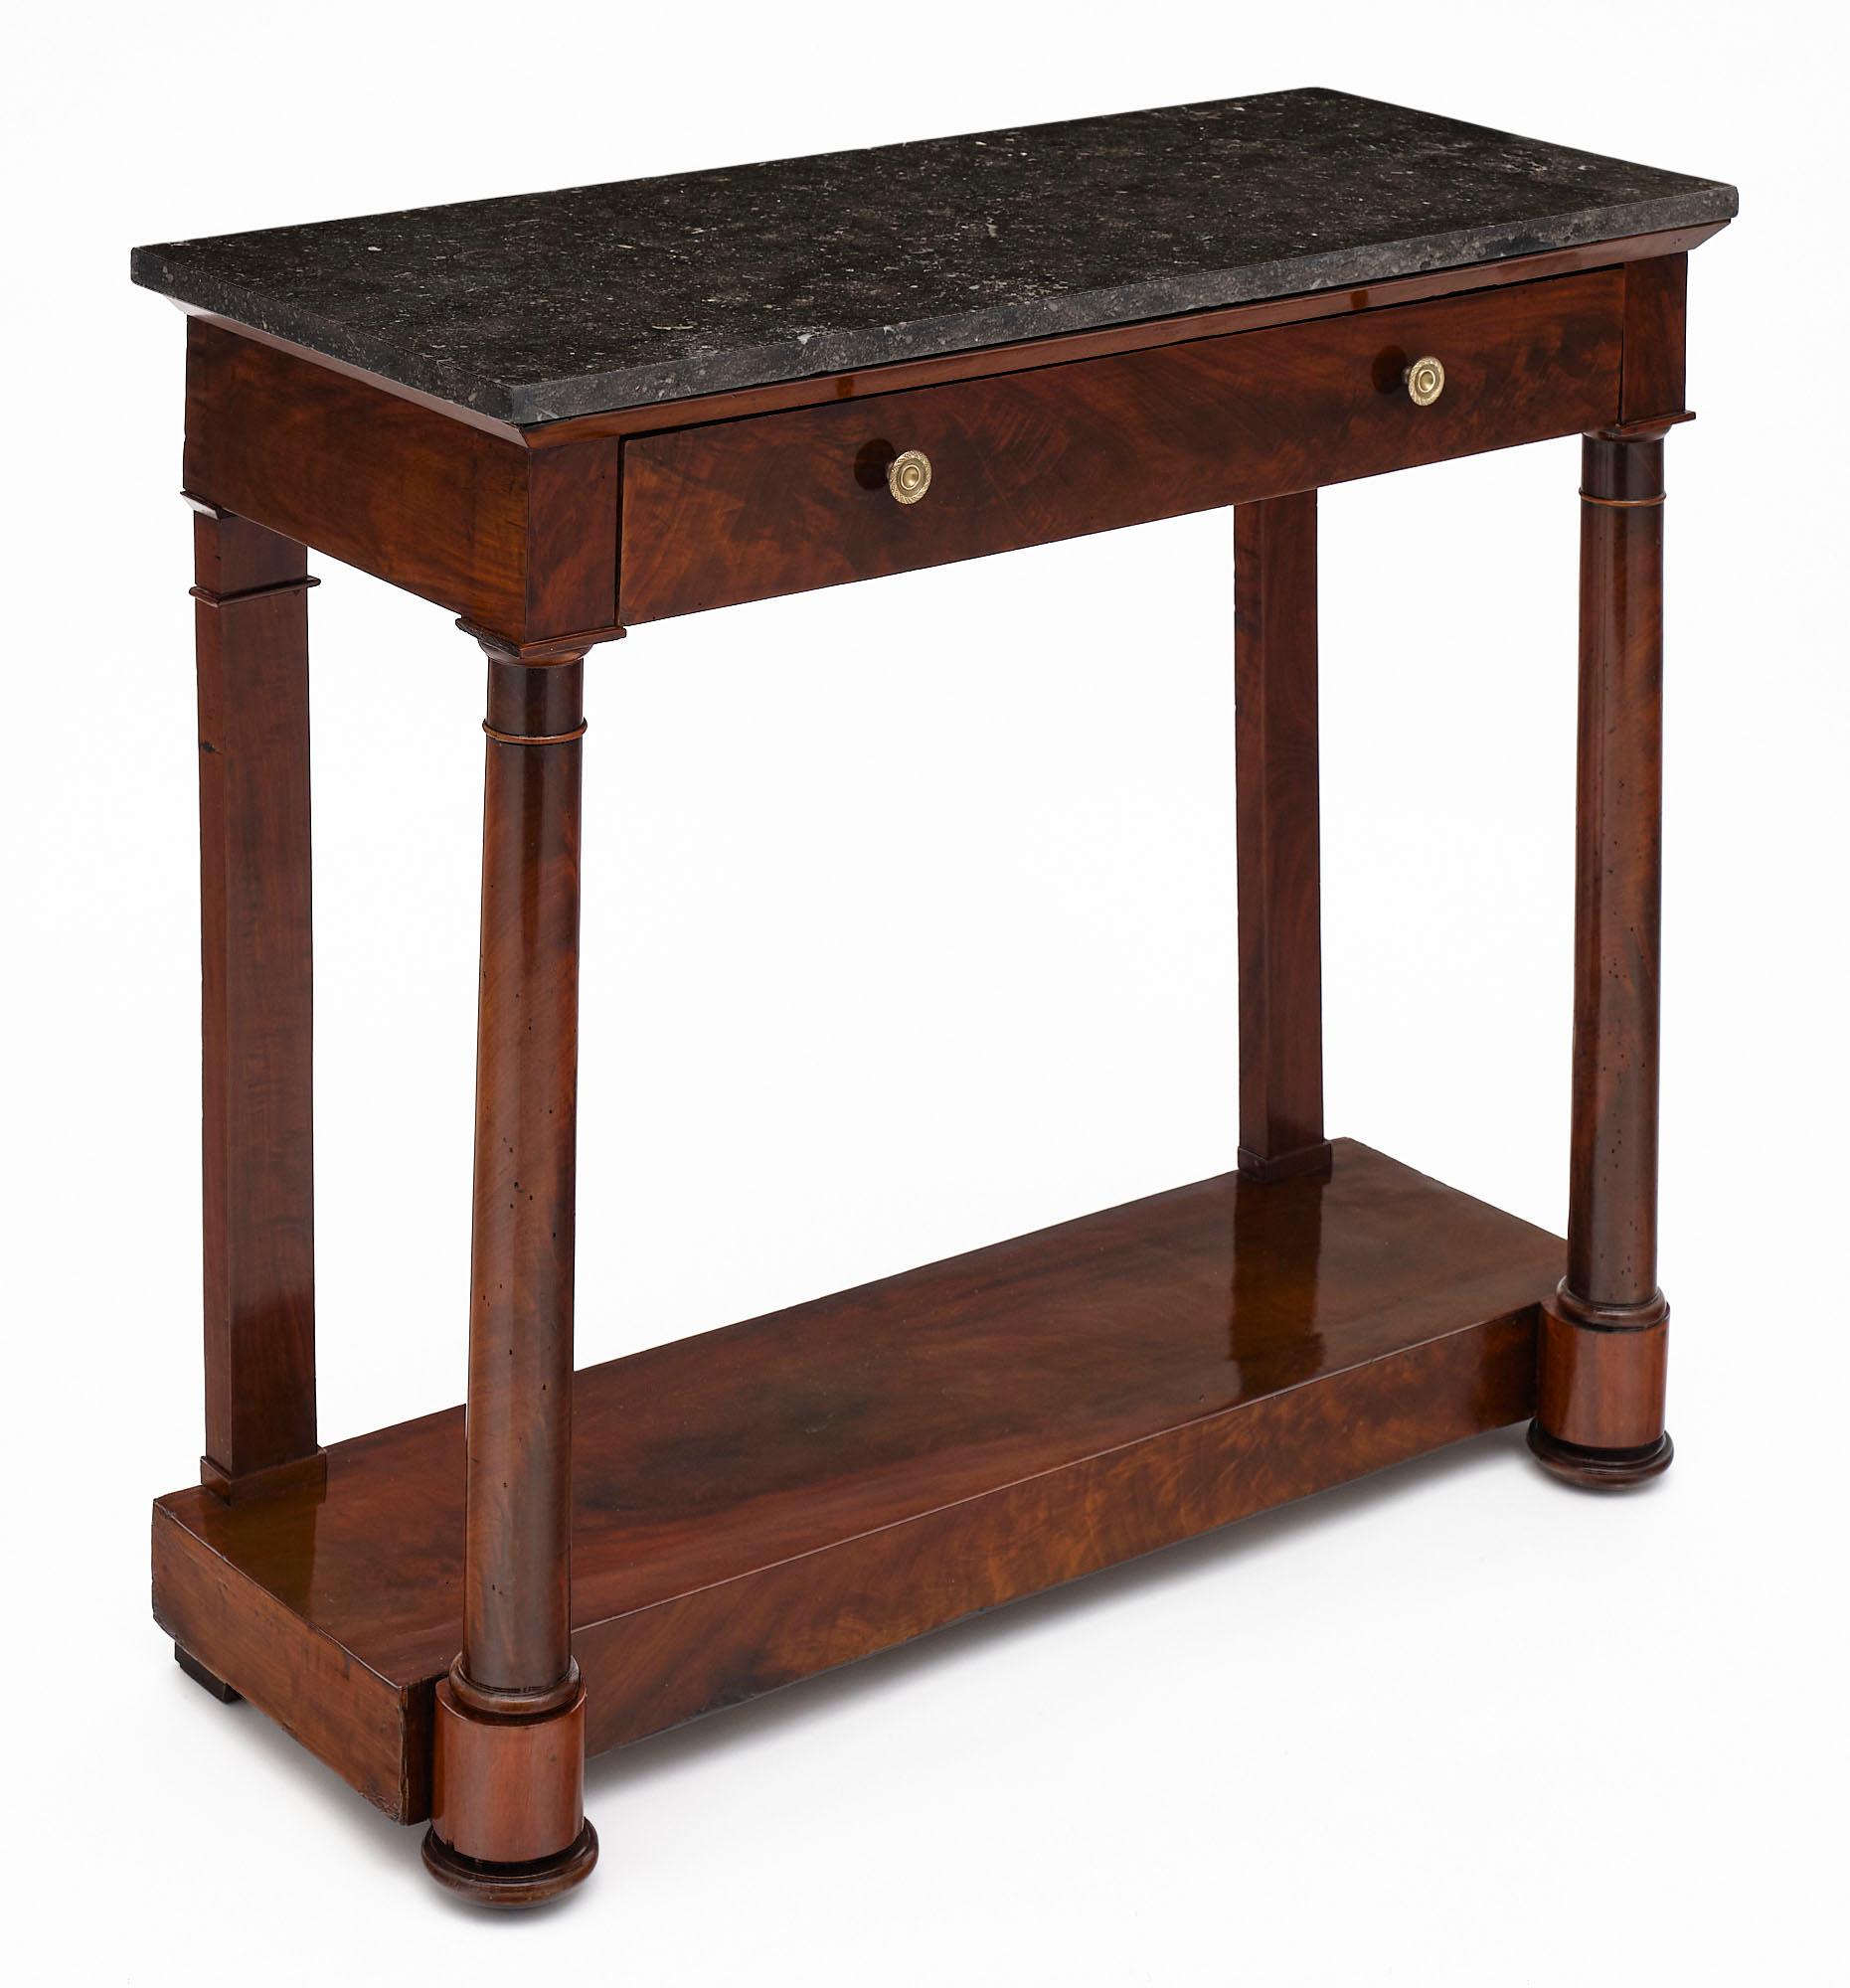 Empire period console table from France made of flamed Cuban mahogany. This piece has one dovetailed drawer with bronze hardware and a lower shelf. It is topped with a slab of gray marble.